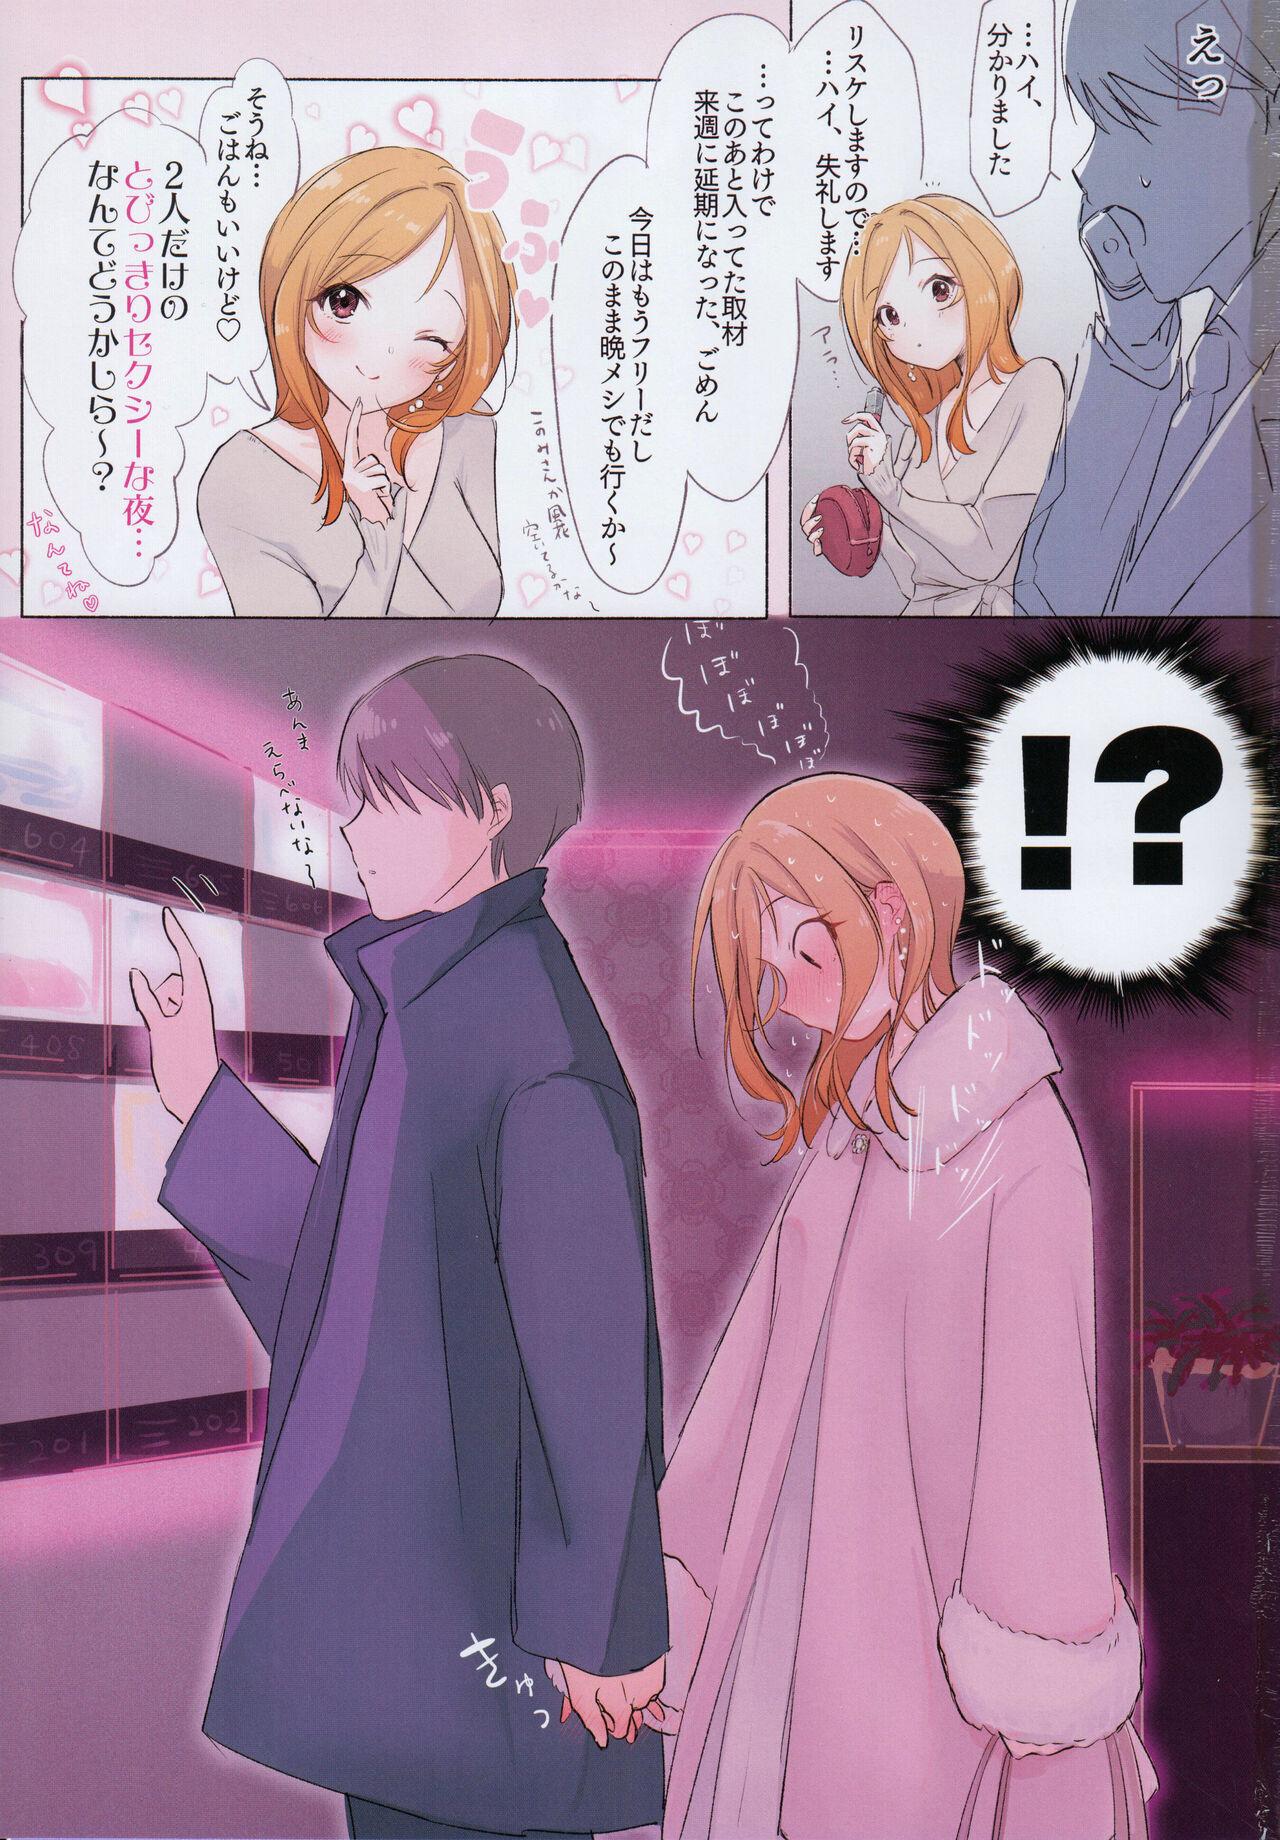 Dad By the way, Producer-kun, what do people do at a love hotel? - The idolmaster For - Picture 2